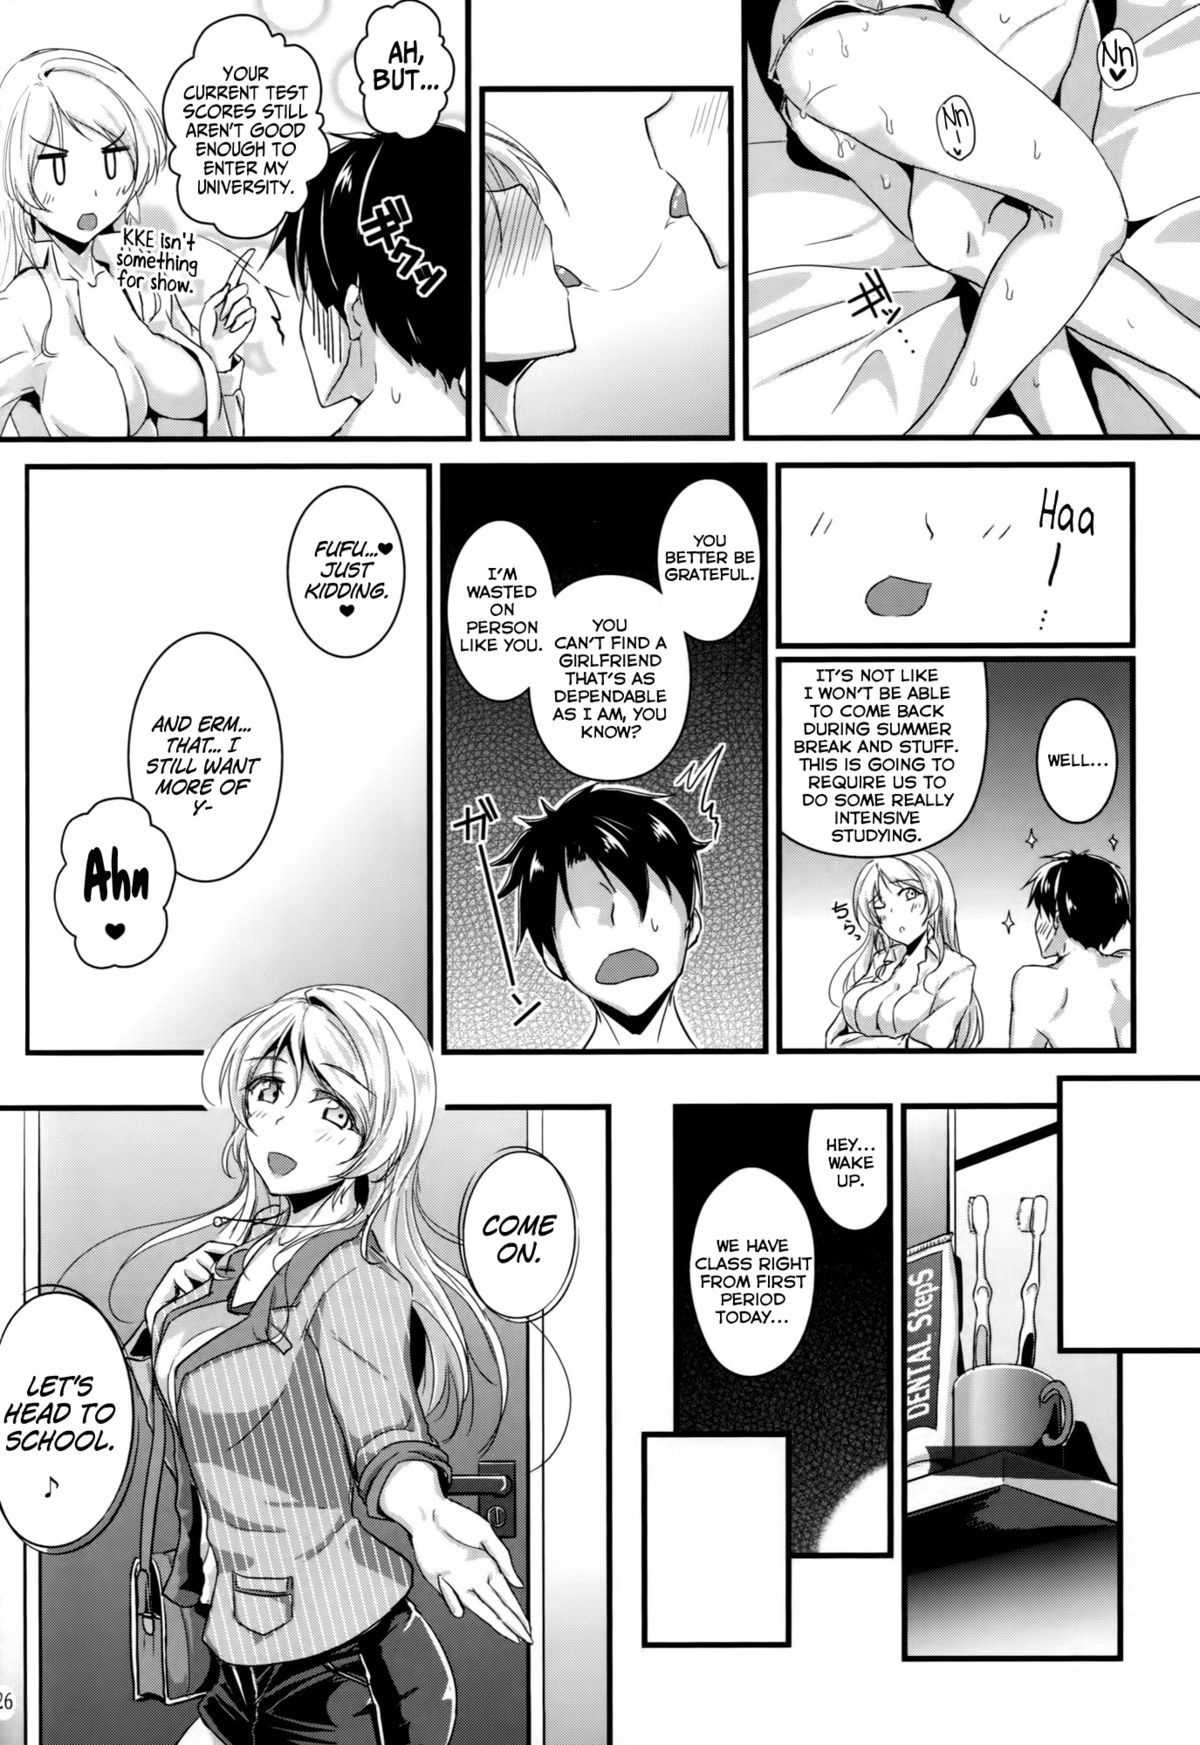 (C87) [Nuno no Ie (Moonlight)] Let's Study××× 5 (Love Live!) [English] [Facedesk] page 25 full